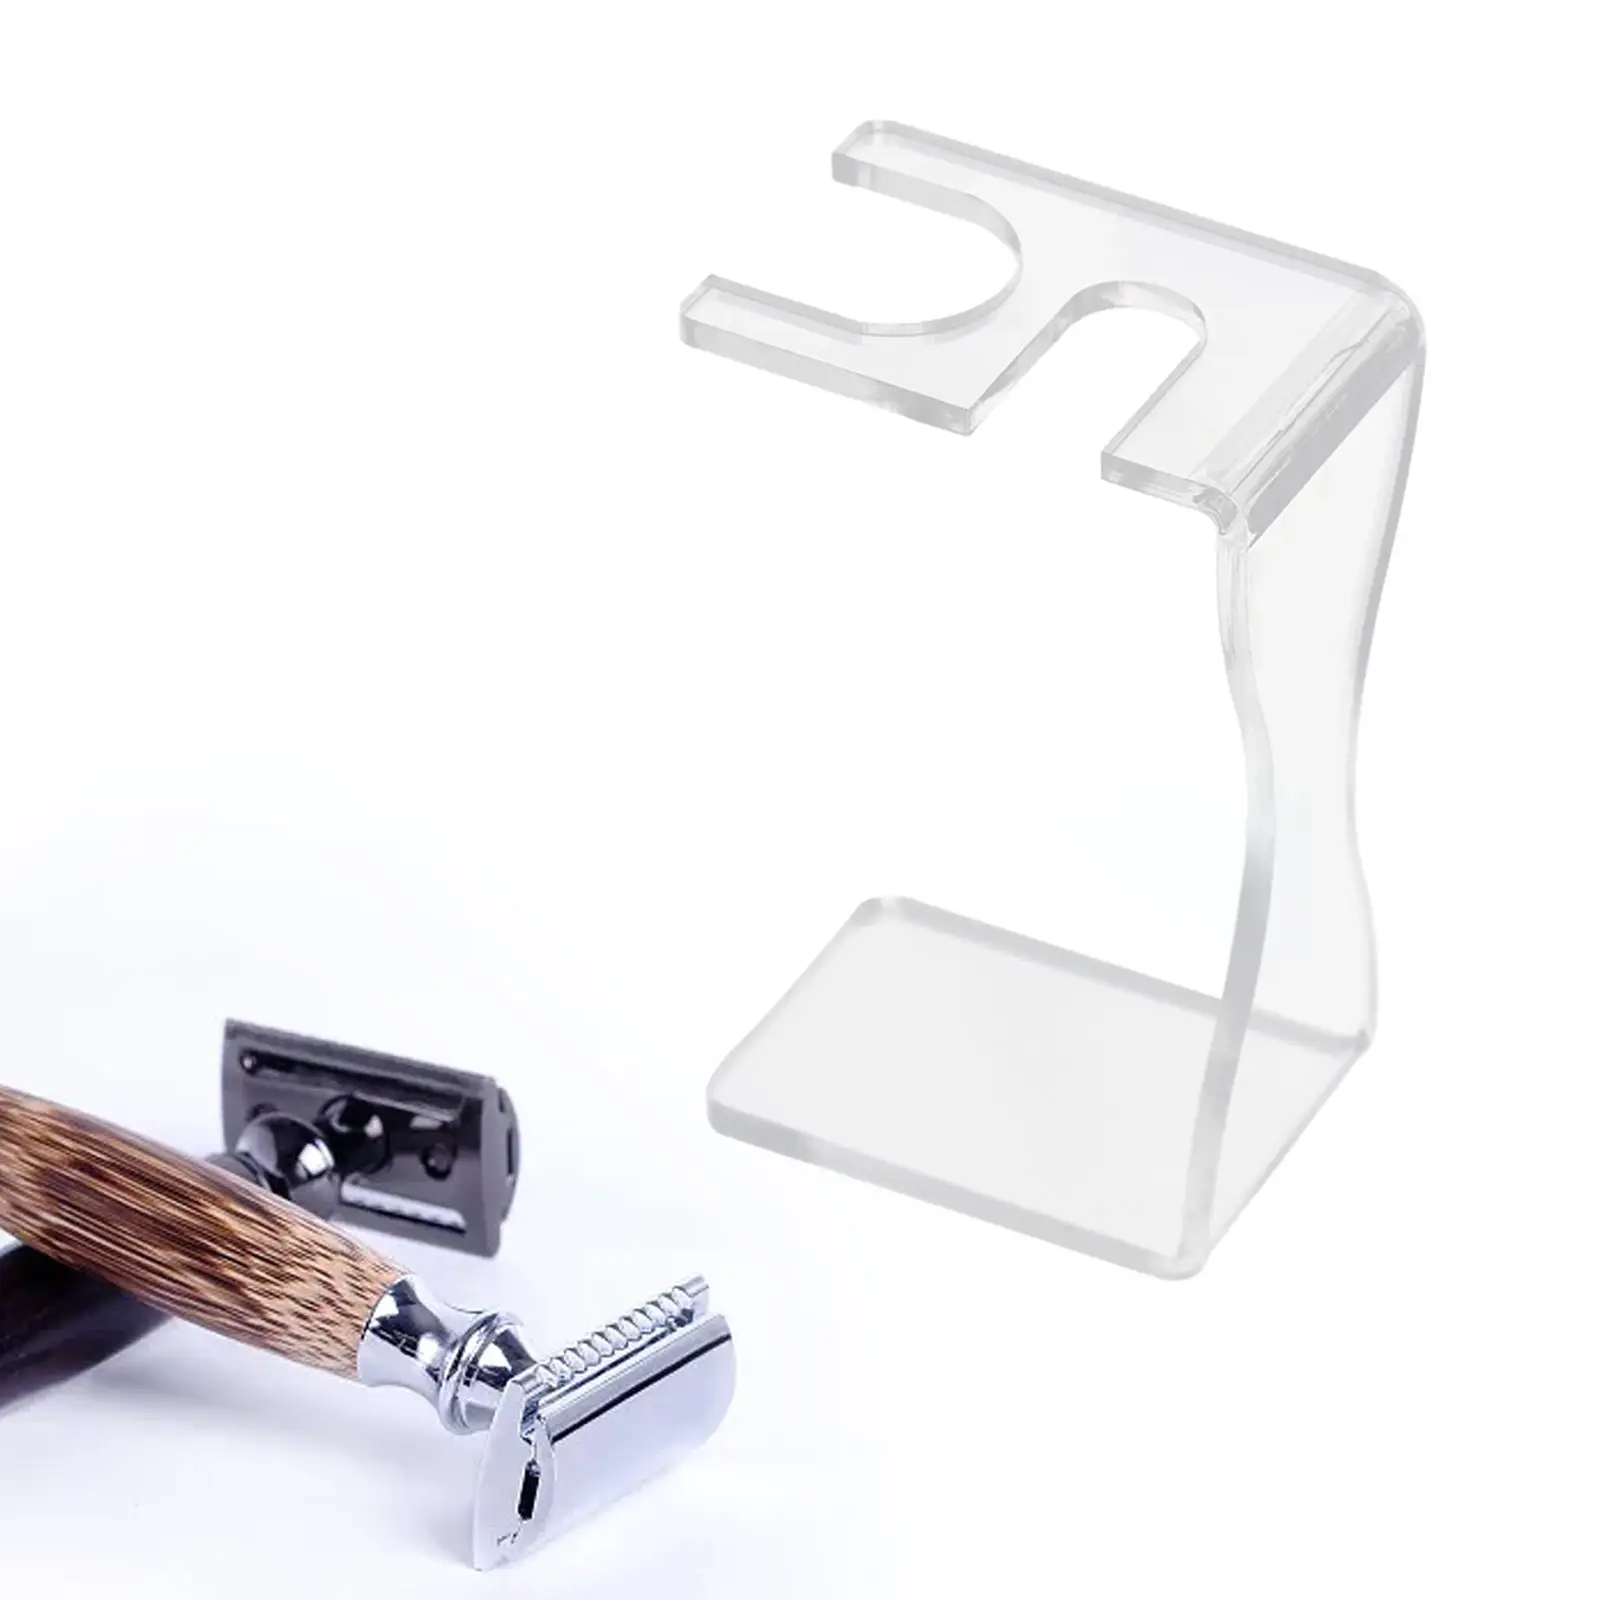 Manual Shaver Stand Holder Rack Durable Anti Skid Base Versatile 4.4inch Tall Accessory for Protecting and Drying Shaver